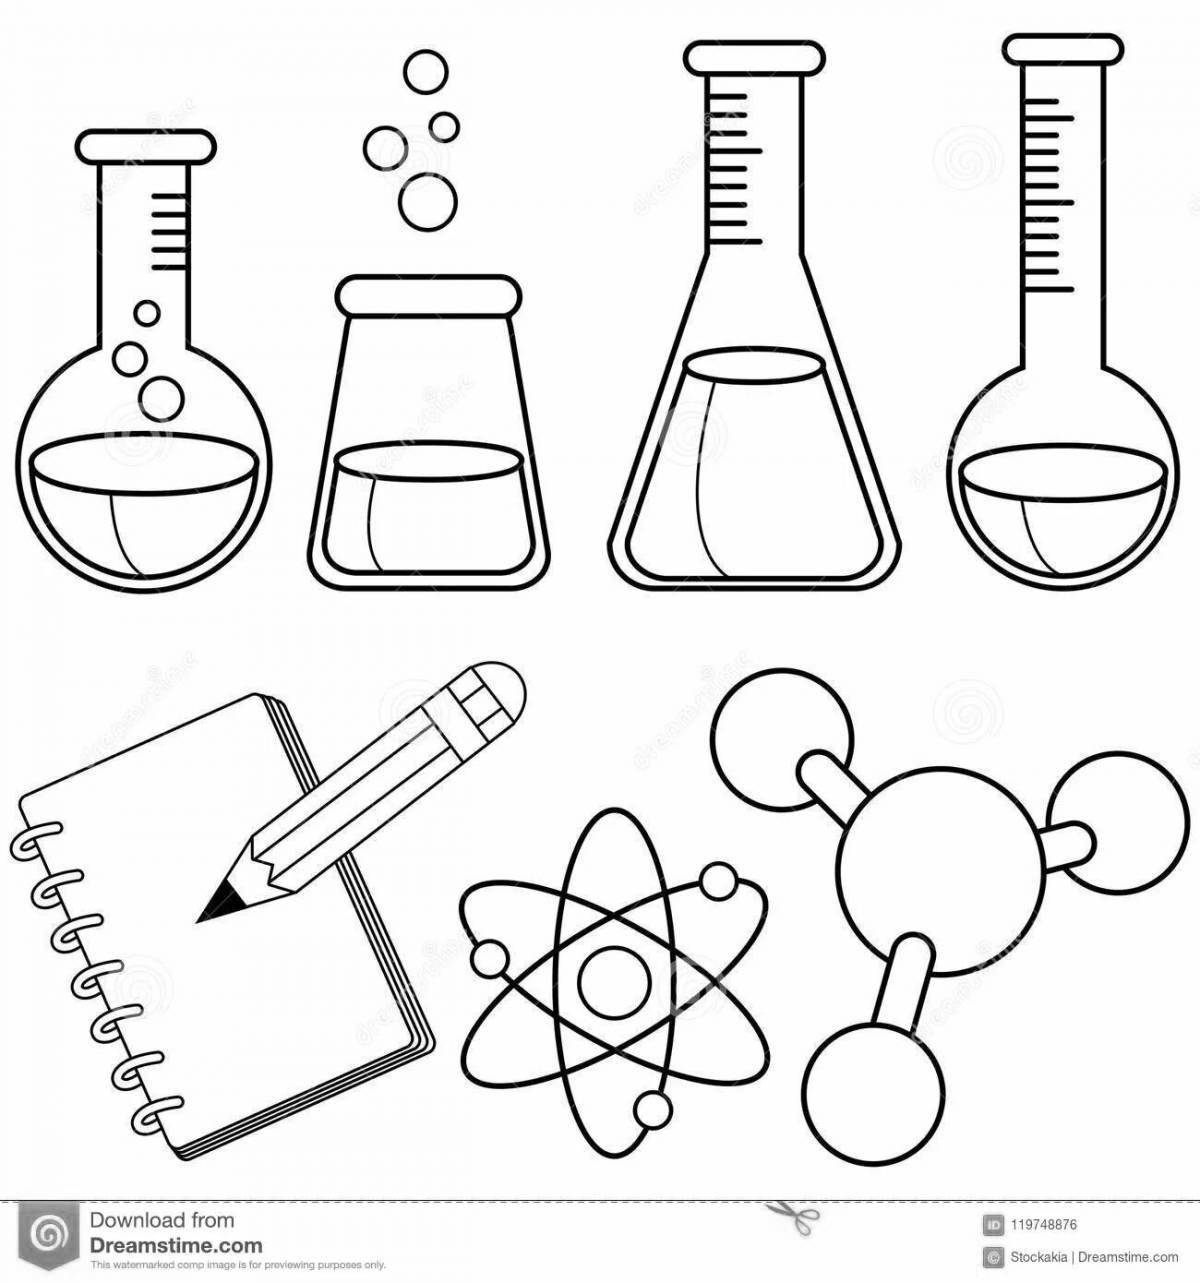 Mystical chemistry lab coloring page